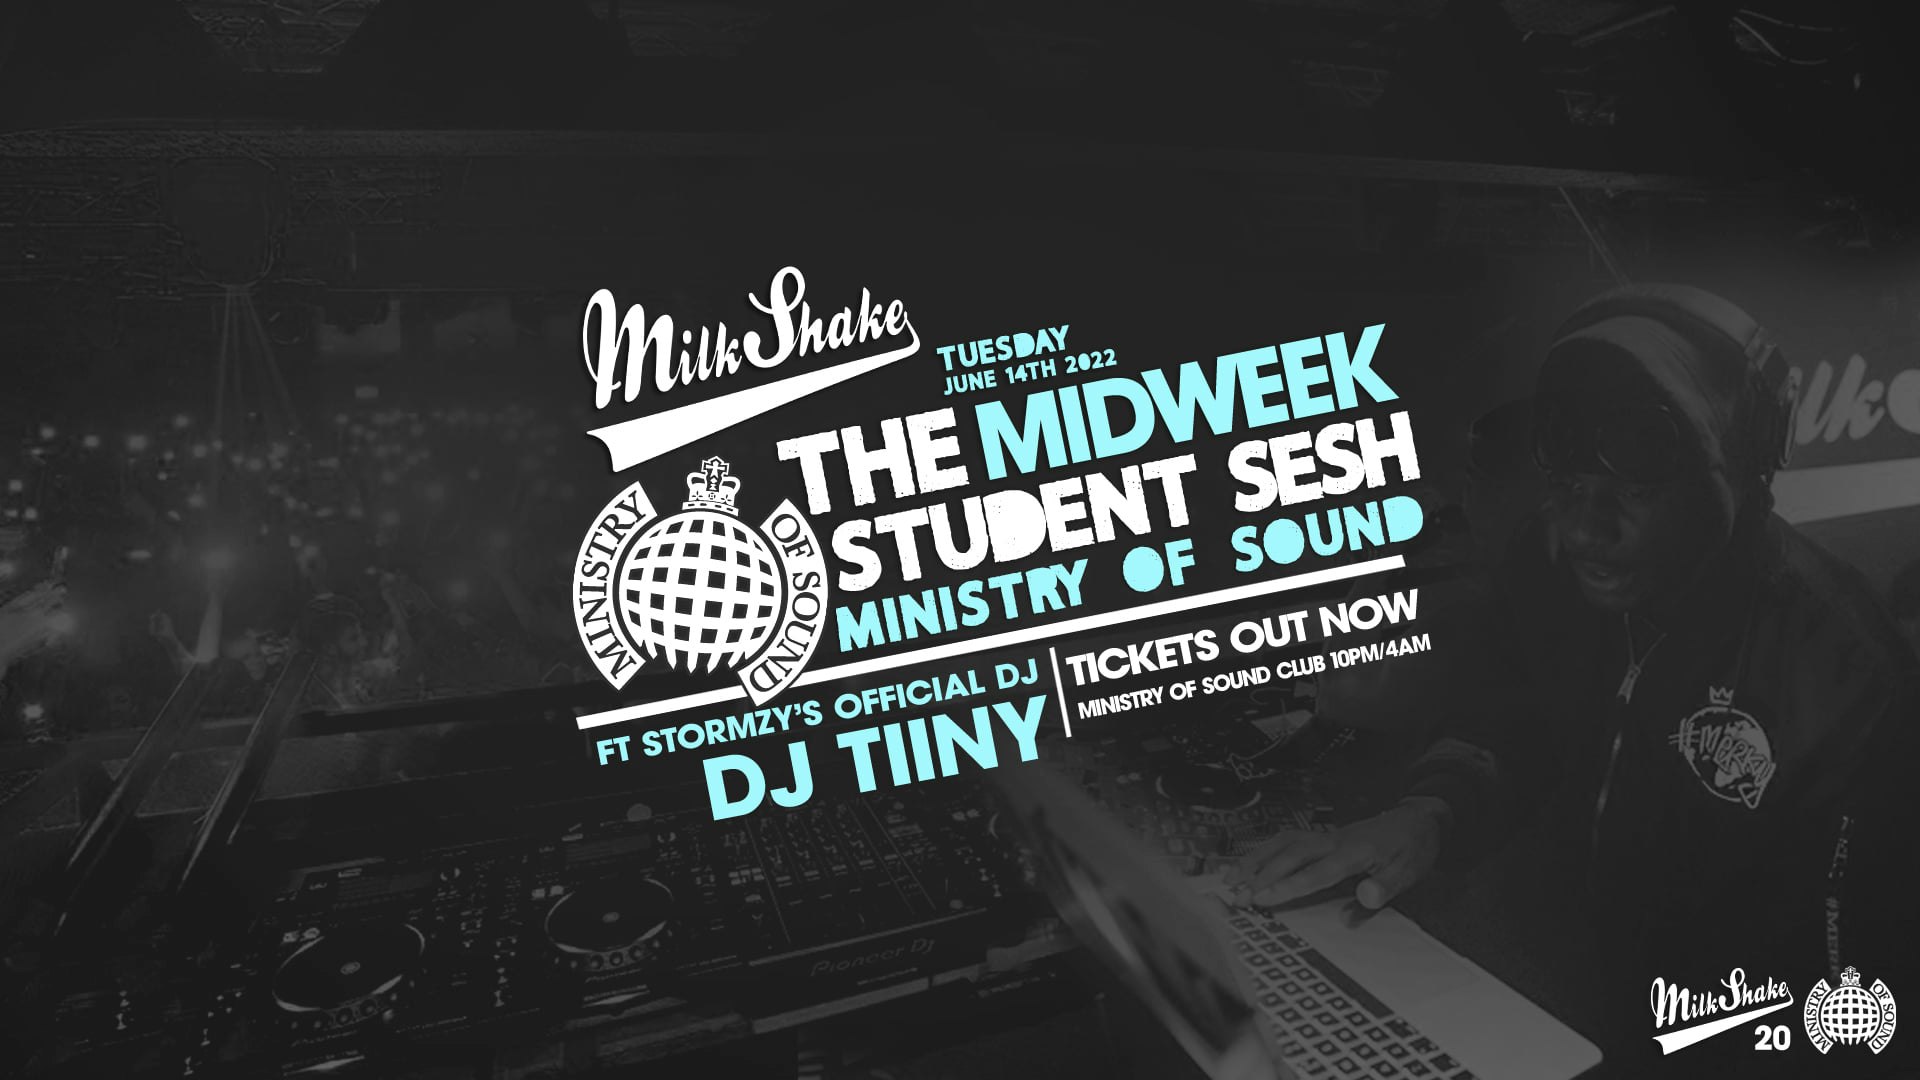 ⚠️ SOLD OUT ⚠️ Milkshake, Ministry of Sound | London’s Biggest Midweek Rave 🔥 Ft Stormzy’s Official DJ TIINY! ⚠️ SOLD OUT ⚠️